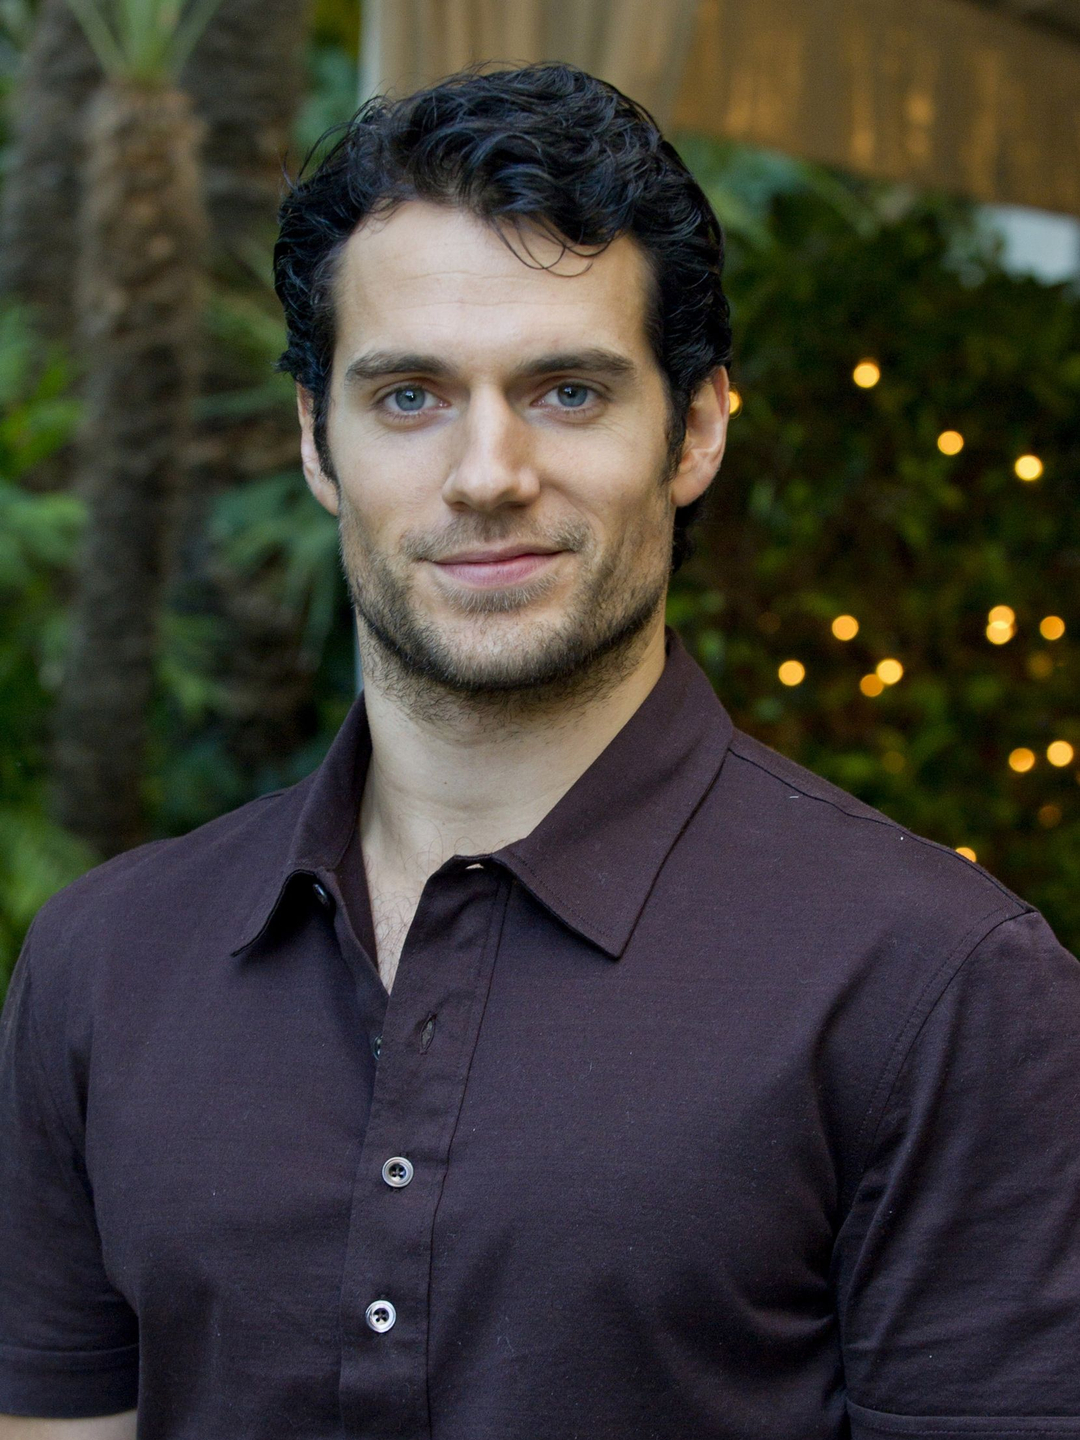 Henry Cavill does he have a wife